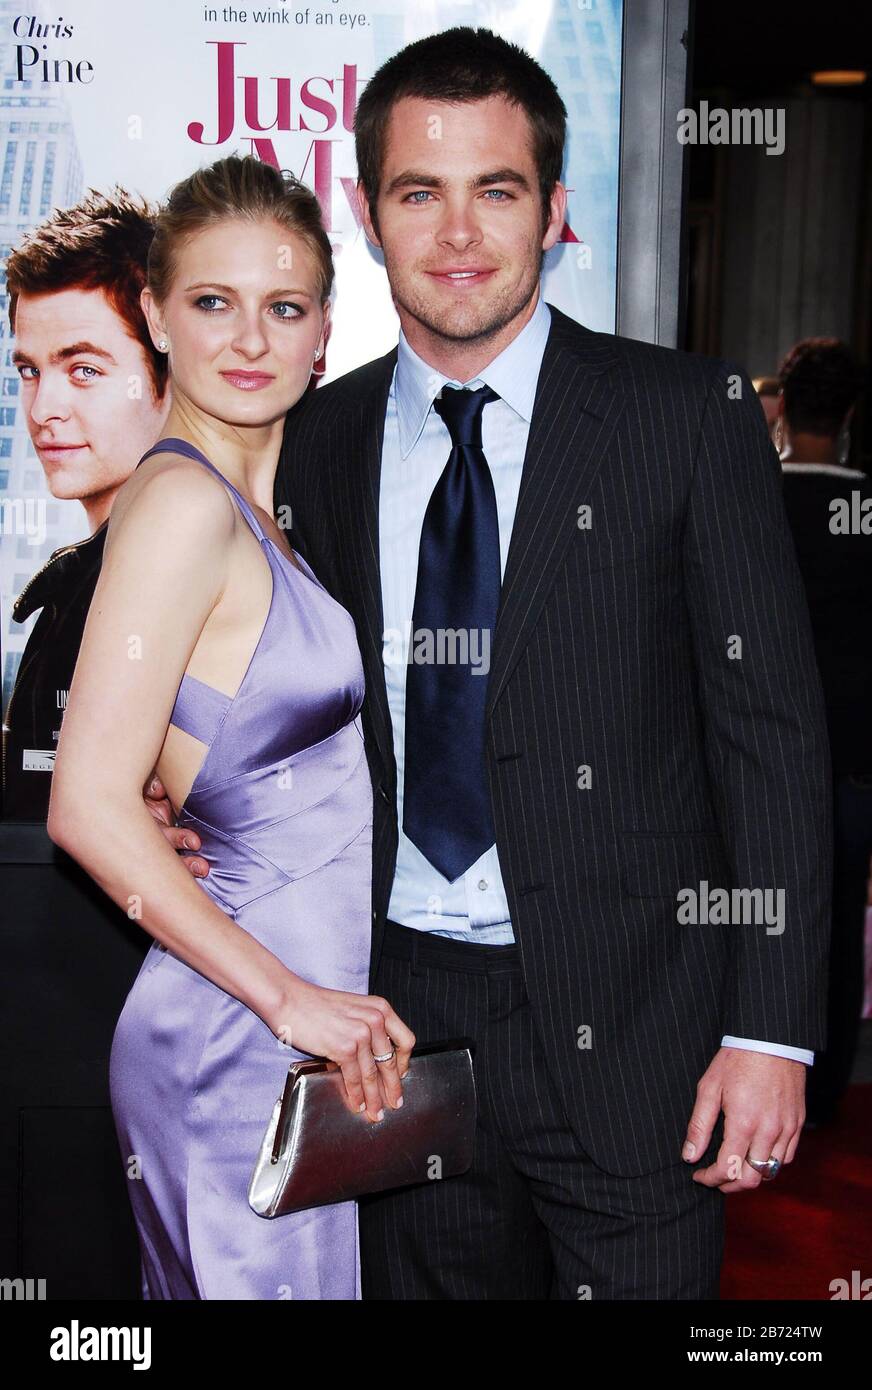 Chris Pine and Girlfriend at the Los Angeles Premiere of "Just My Luck"  held at the Mann National Theatre in Westwood, CA. The event took place on  Tuesday, May 9, 2006. Photo